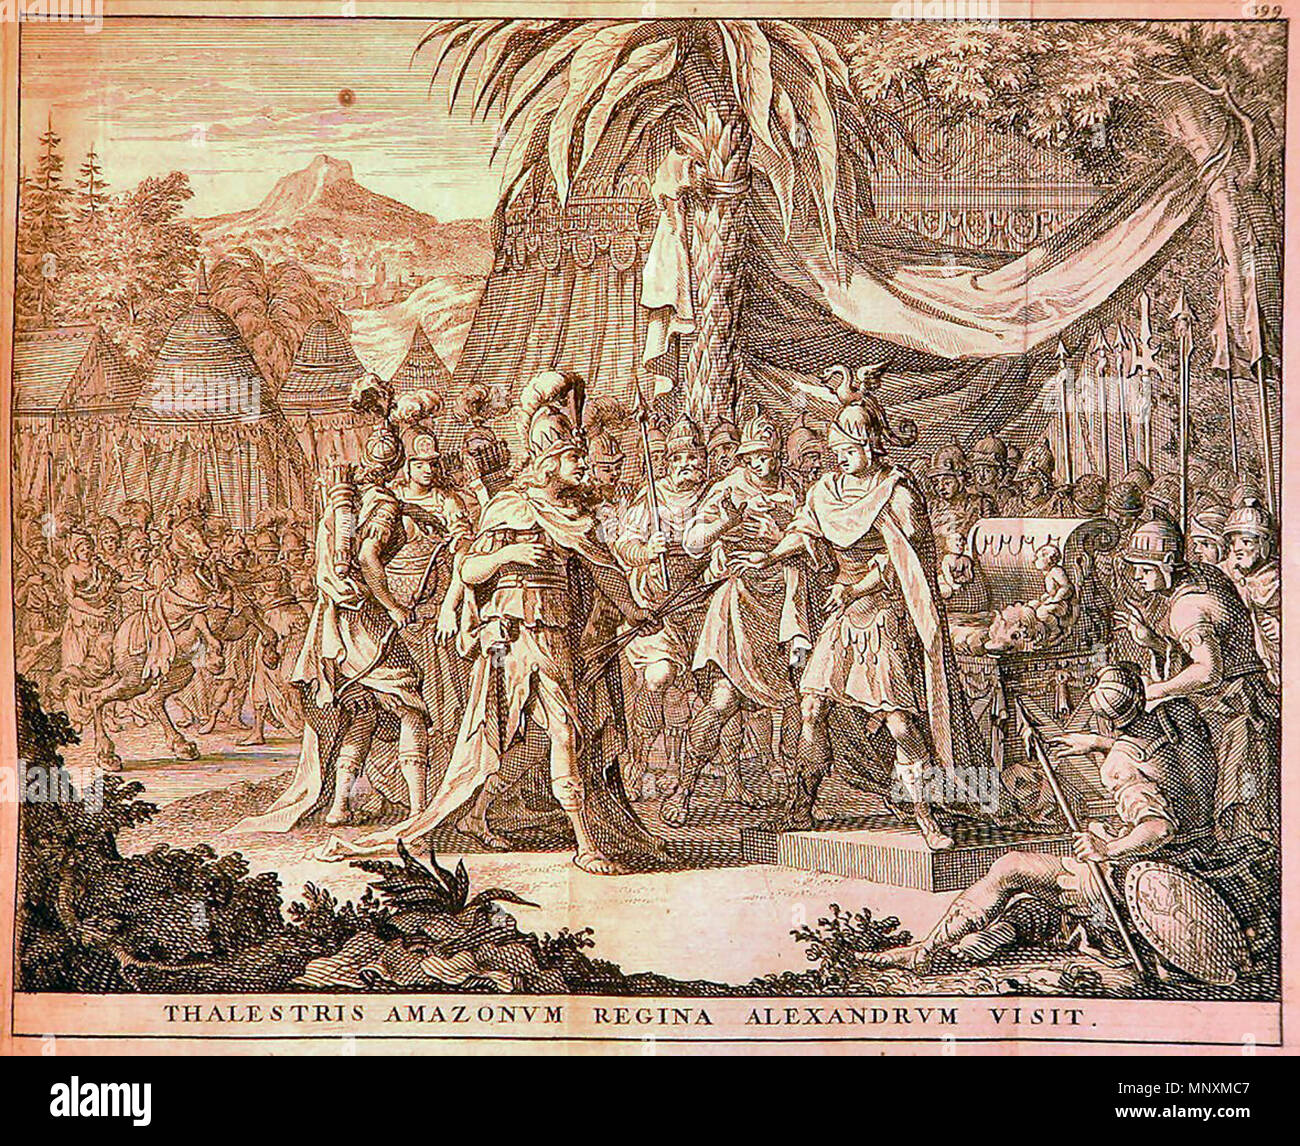 . Thalestris, Queen of the Amazons, visits Alexander . 1696. This file is lacking author information. 1167 Thalestris, Queen of the Amazons, visits Alexander (1696) Stock Photo